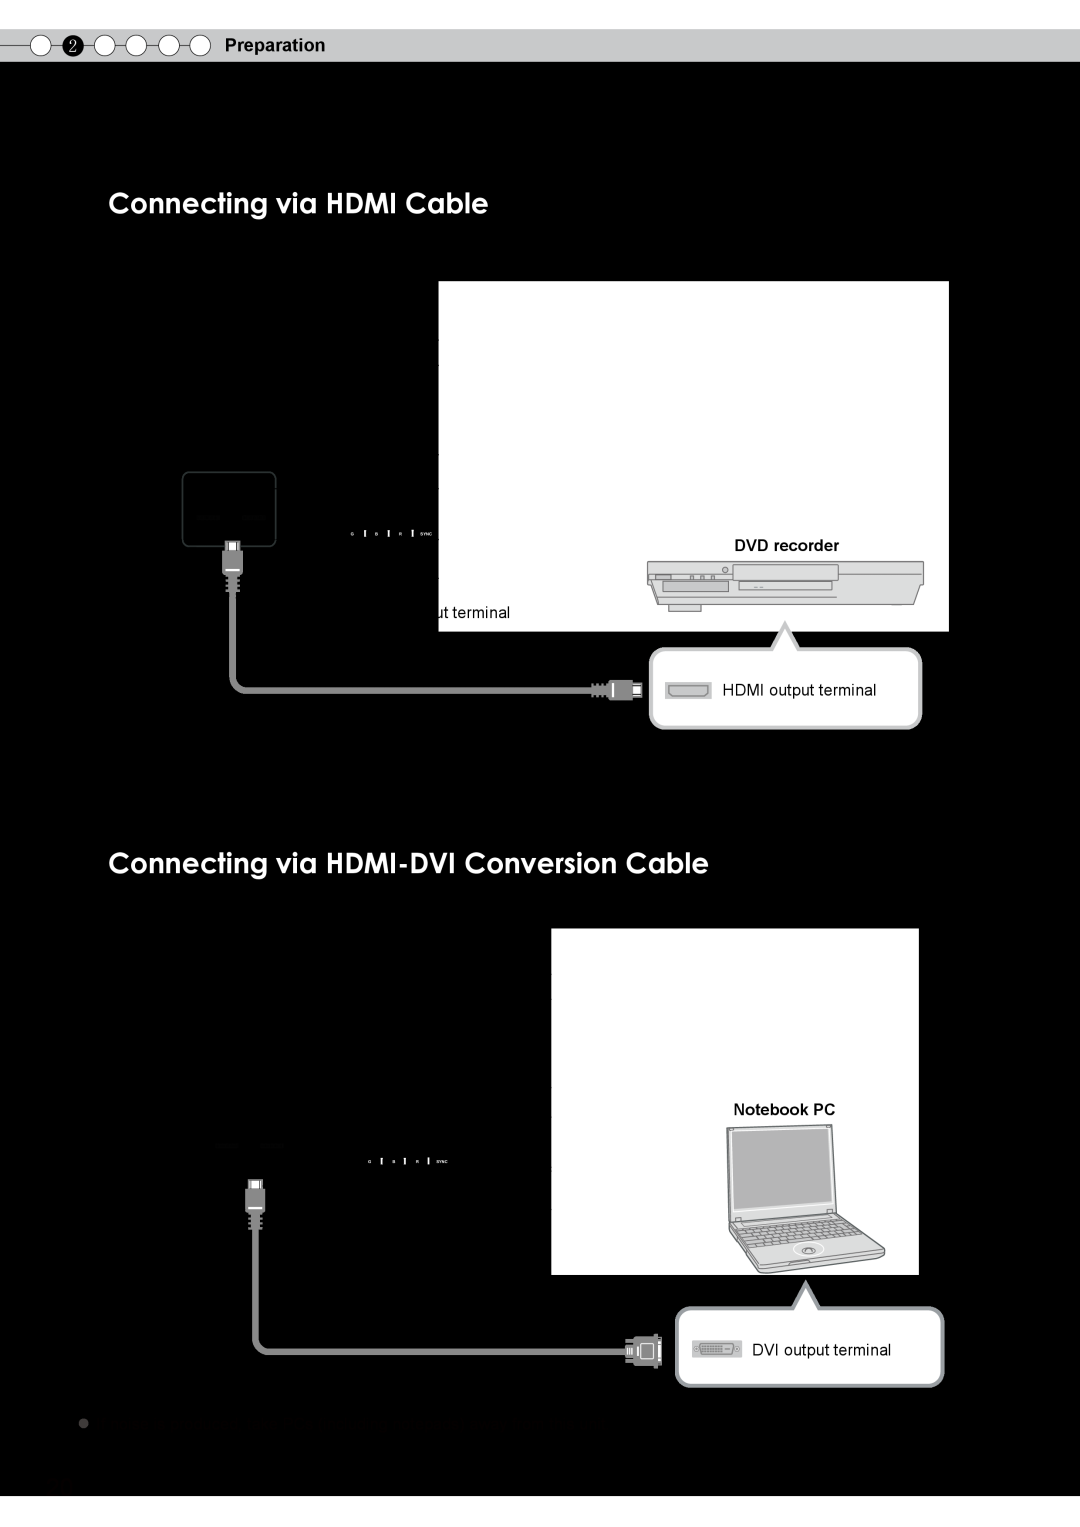 JVC DLA-RS10 ConnectingContinued, Connecting via HDMI Cable, Connecting via HDMI-DVI Conversion Cable, Preparation, Hdmi 